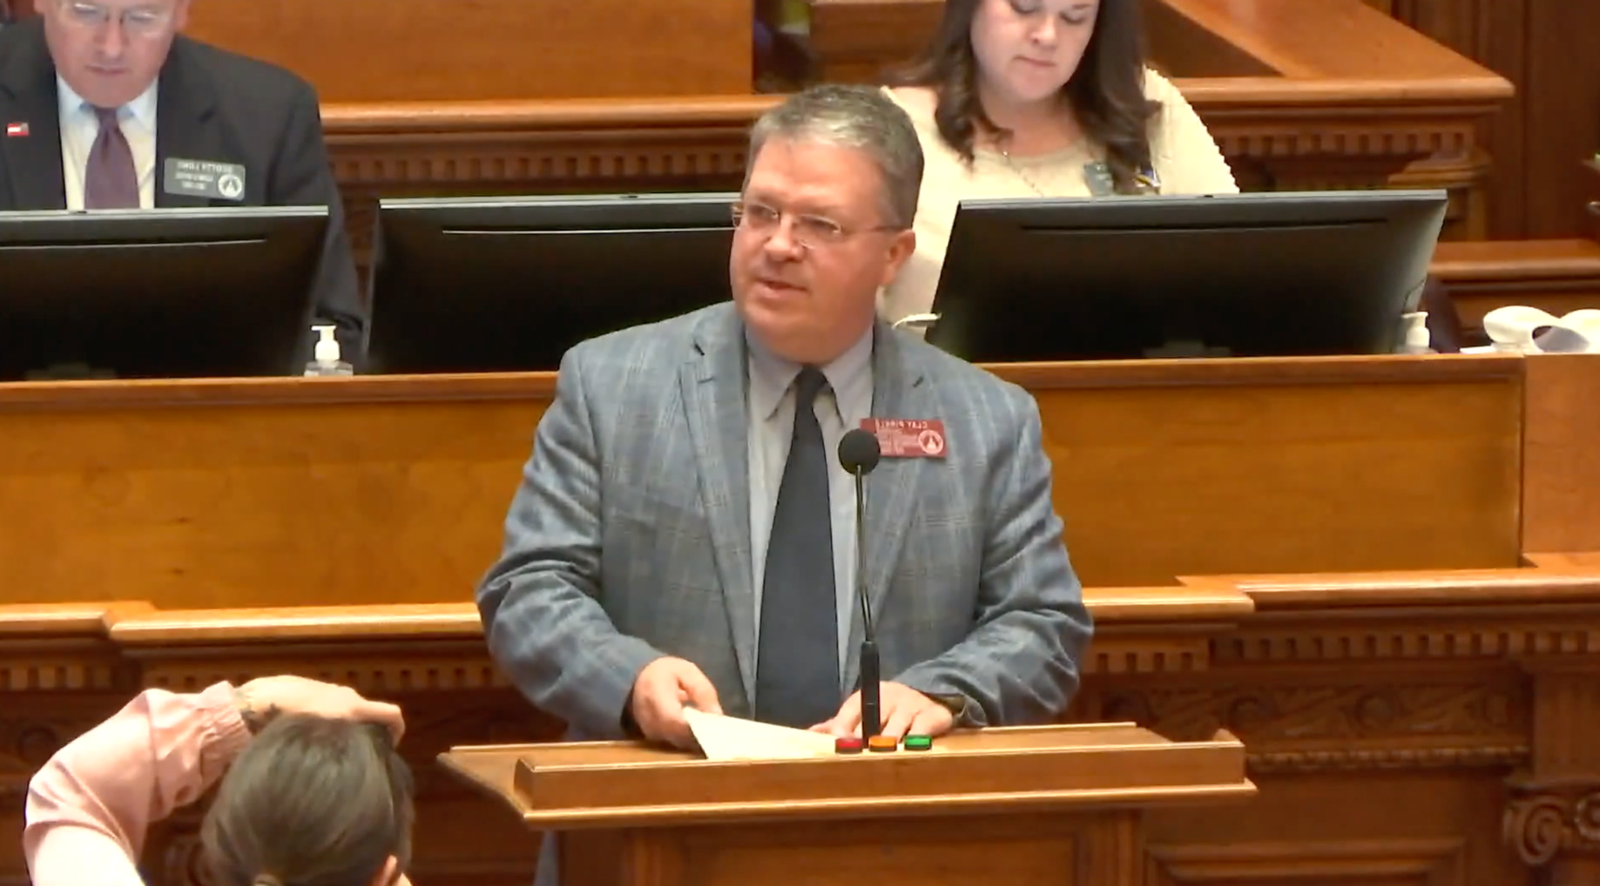 Rep. Clay Pirkle (R-Ashburn) carried House Bill 1175, the Georgia Raw Dairy Act, to final passage this legislative session.